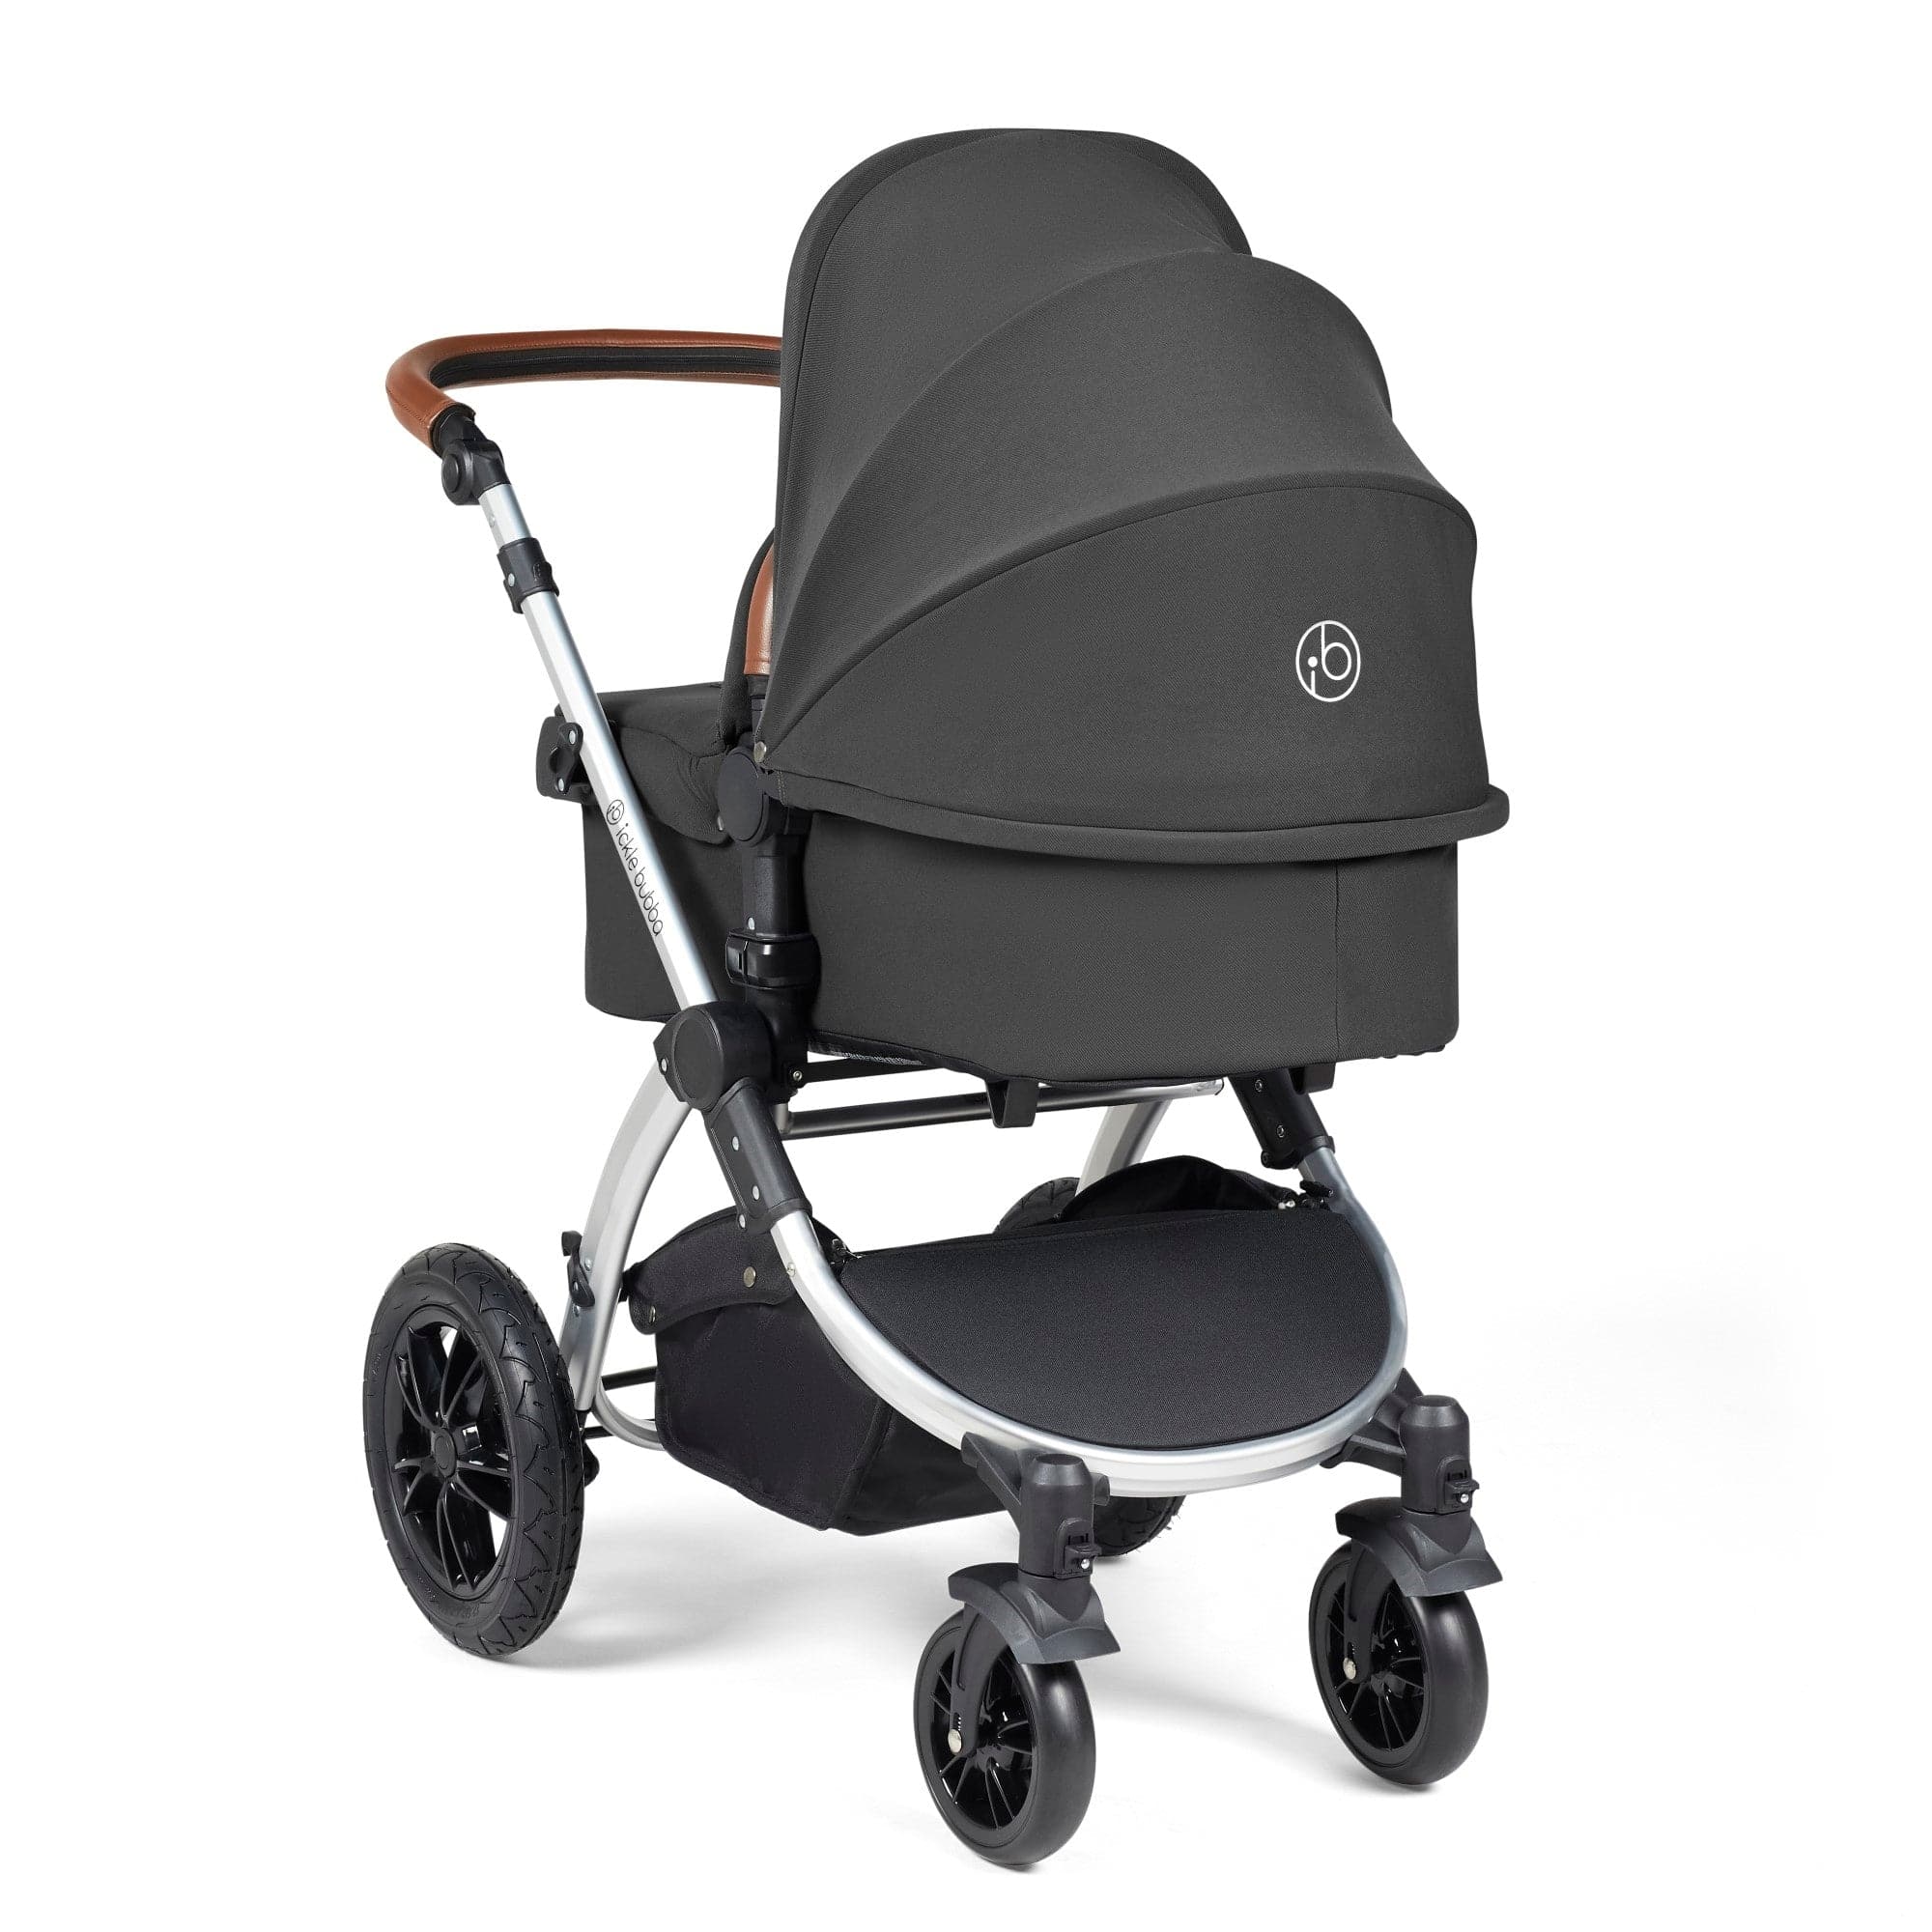 Ickle Bubba Stomp Luxe All-in-One I-Size Travel System With Isofix Base - Silver / Charcoal Grey / Tan - For Your Little One